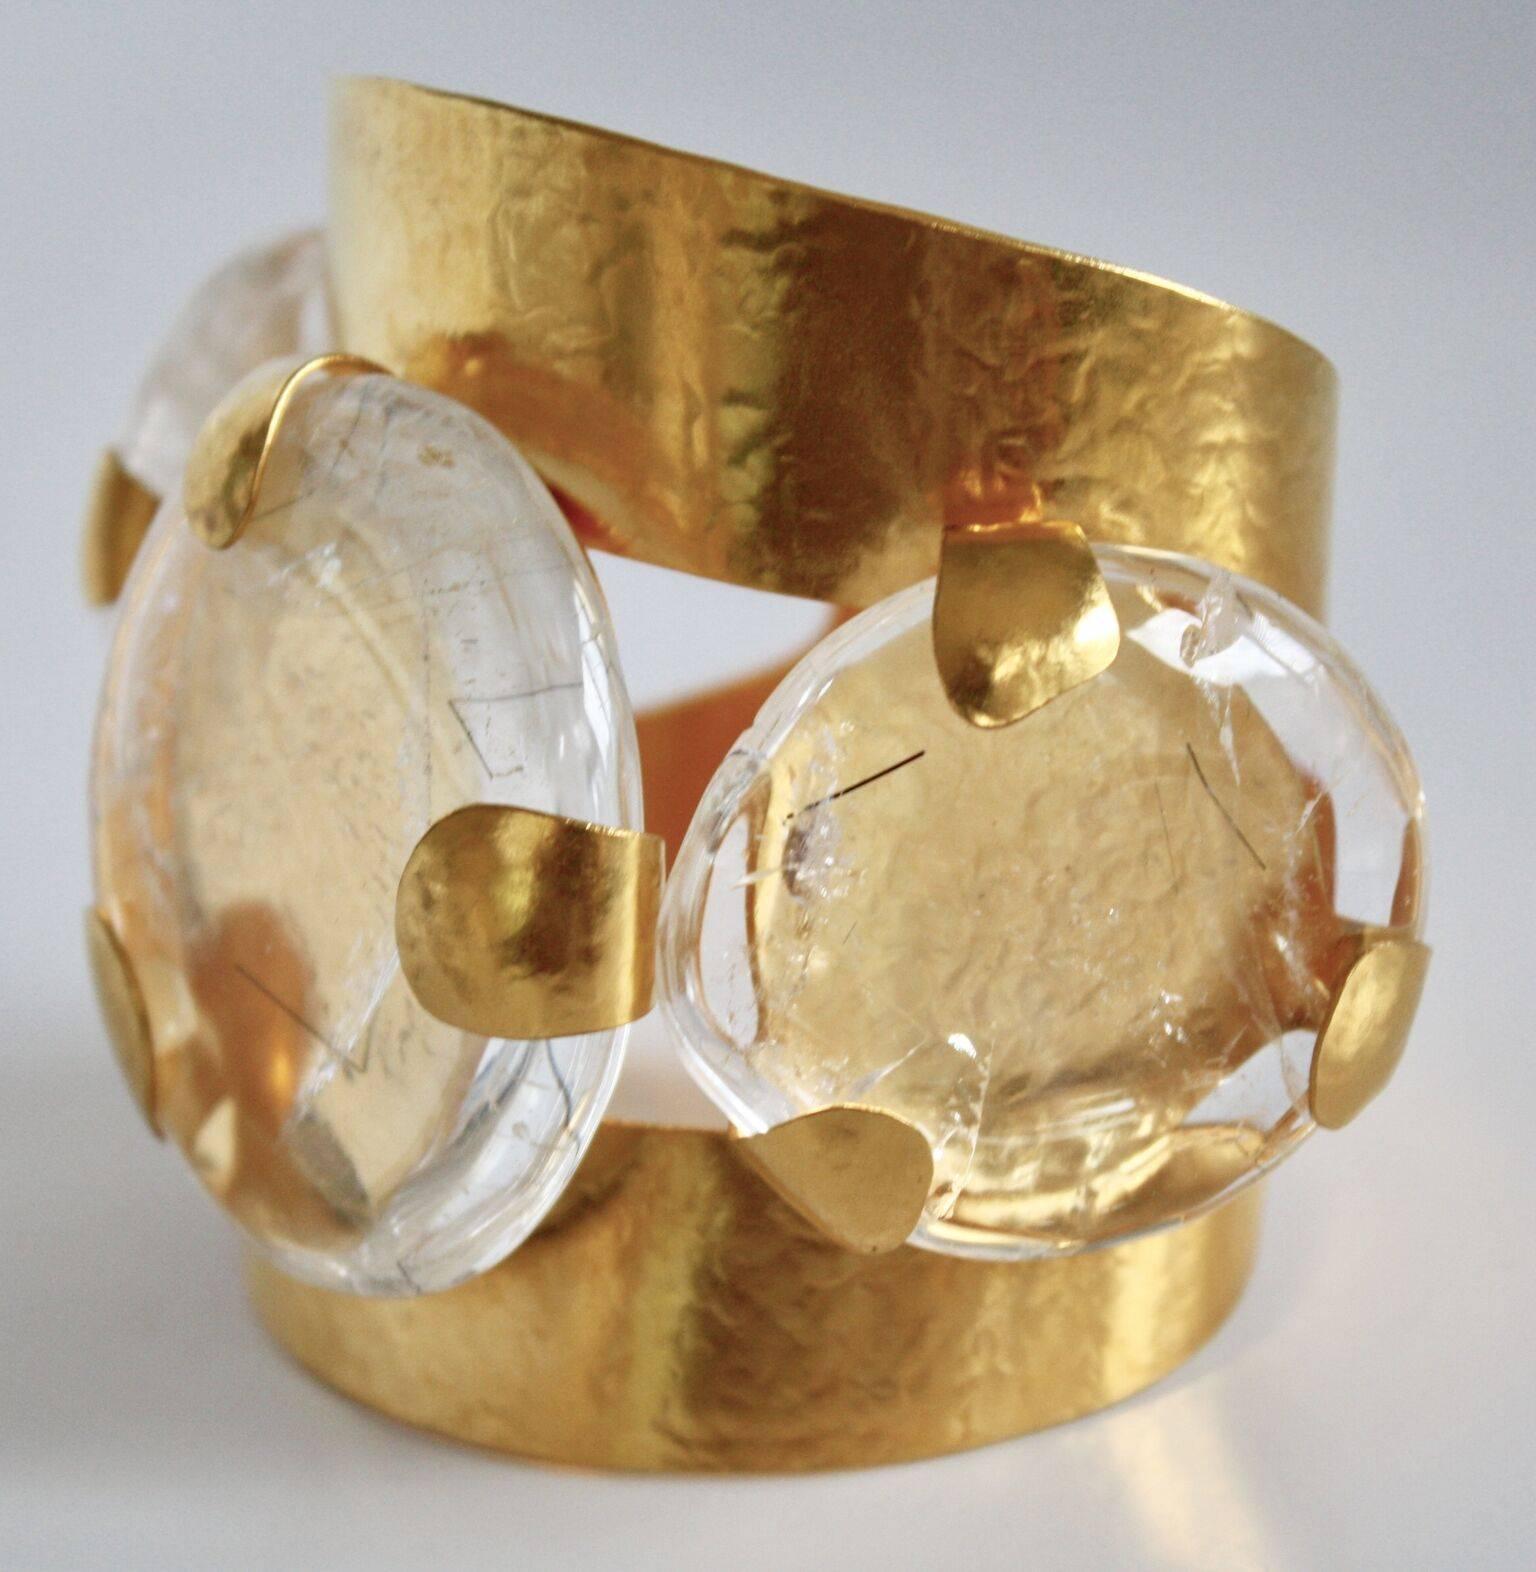 Malleable and fabulous gilded brass cuff with three exquisite rock crystals from Herve van der Straeten. 

Metal is soft, can fit any size wrist. Largest rock crystal is 2.75